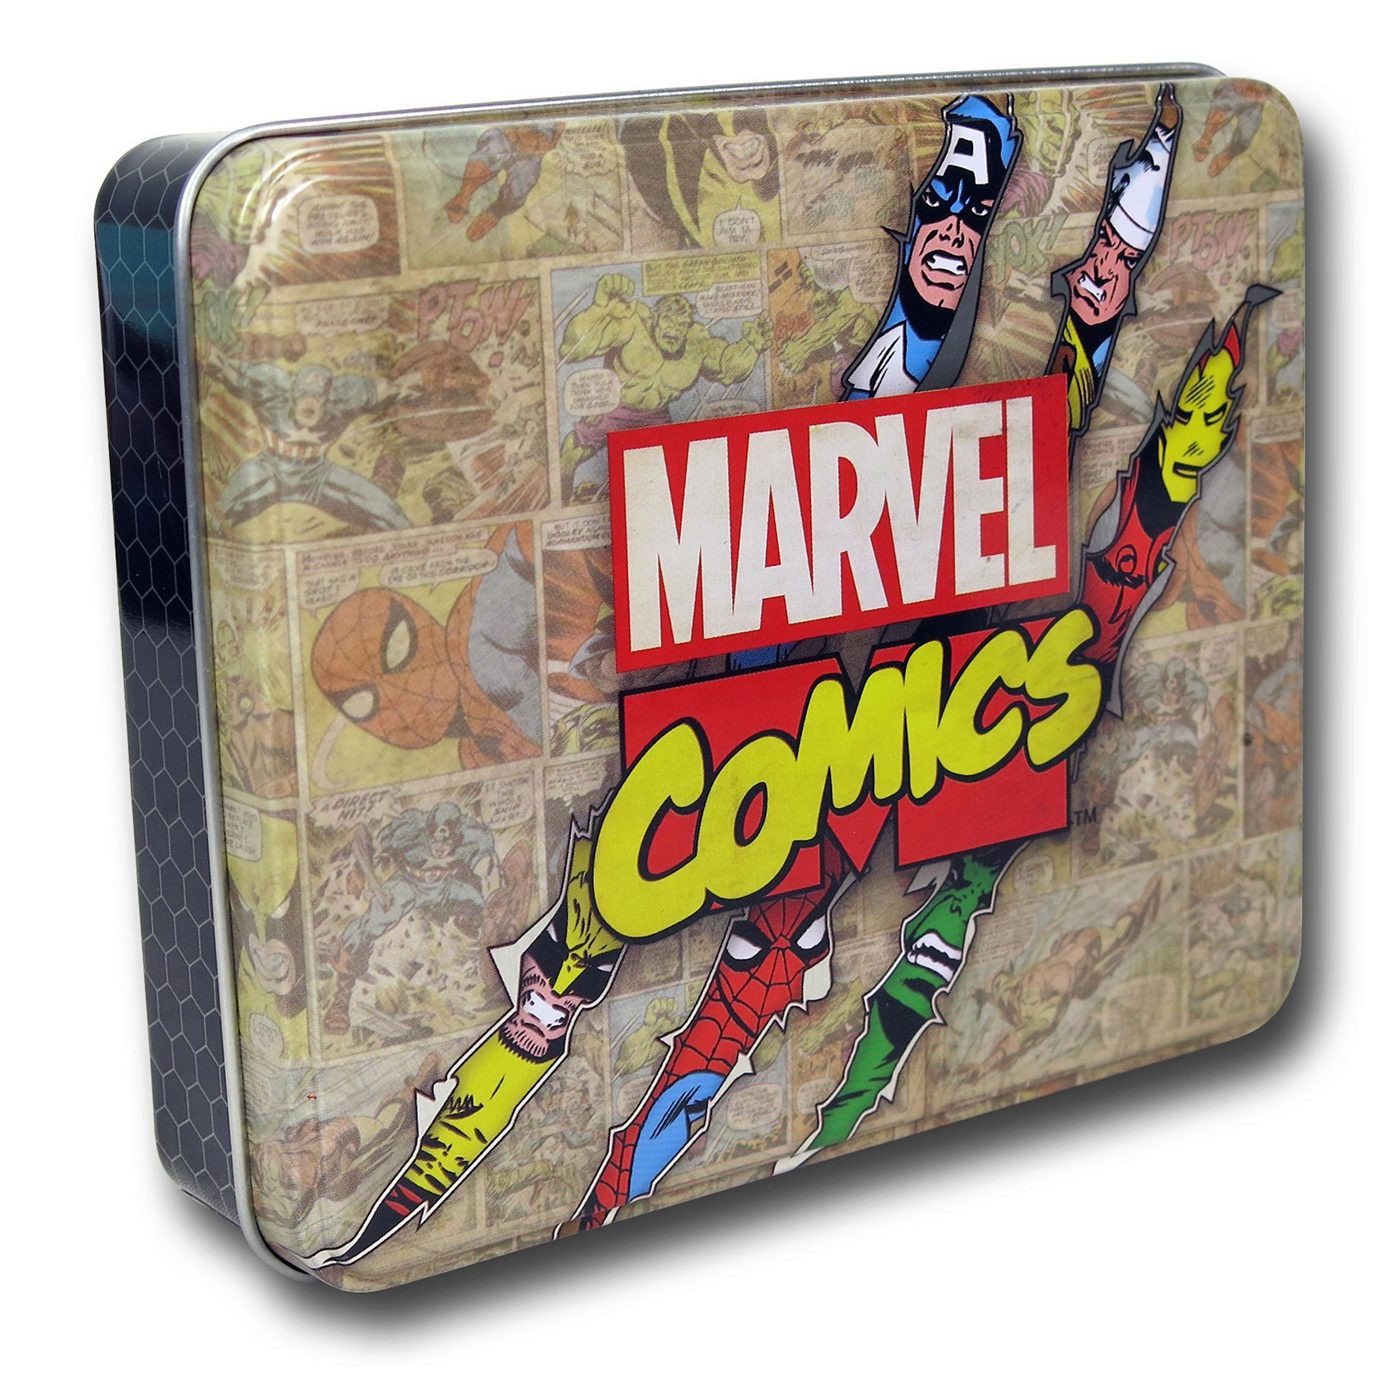 Hulk Annual #1 Cover Wallet and Tin